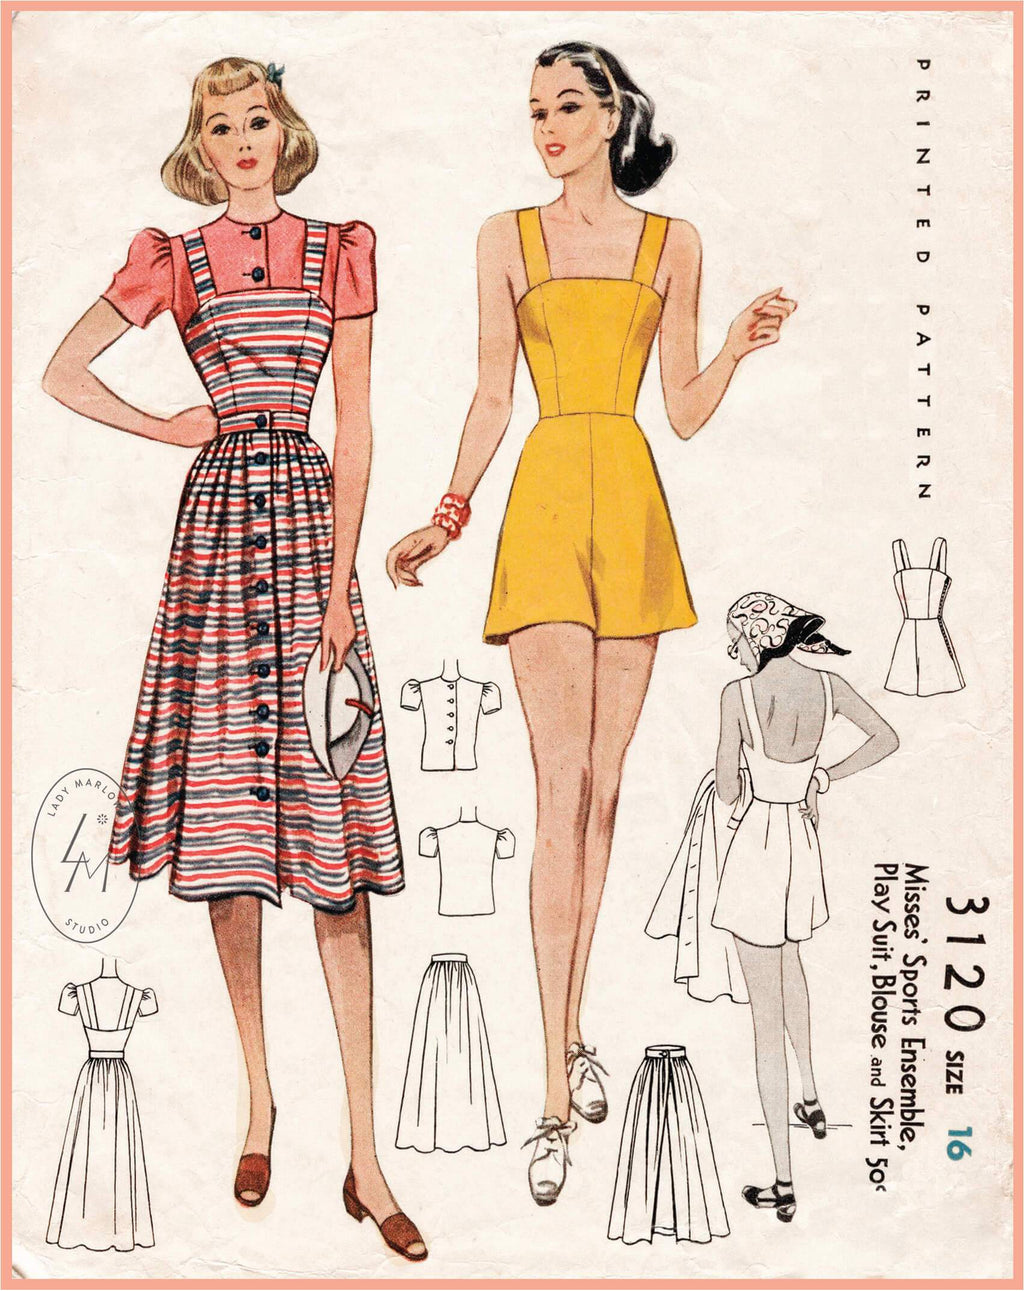 McCall 3120 vintage sewing pattern 1930s 1940s pinafore playsuit puff sleeve blouse dress